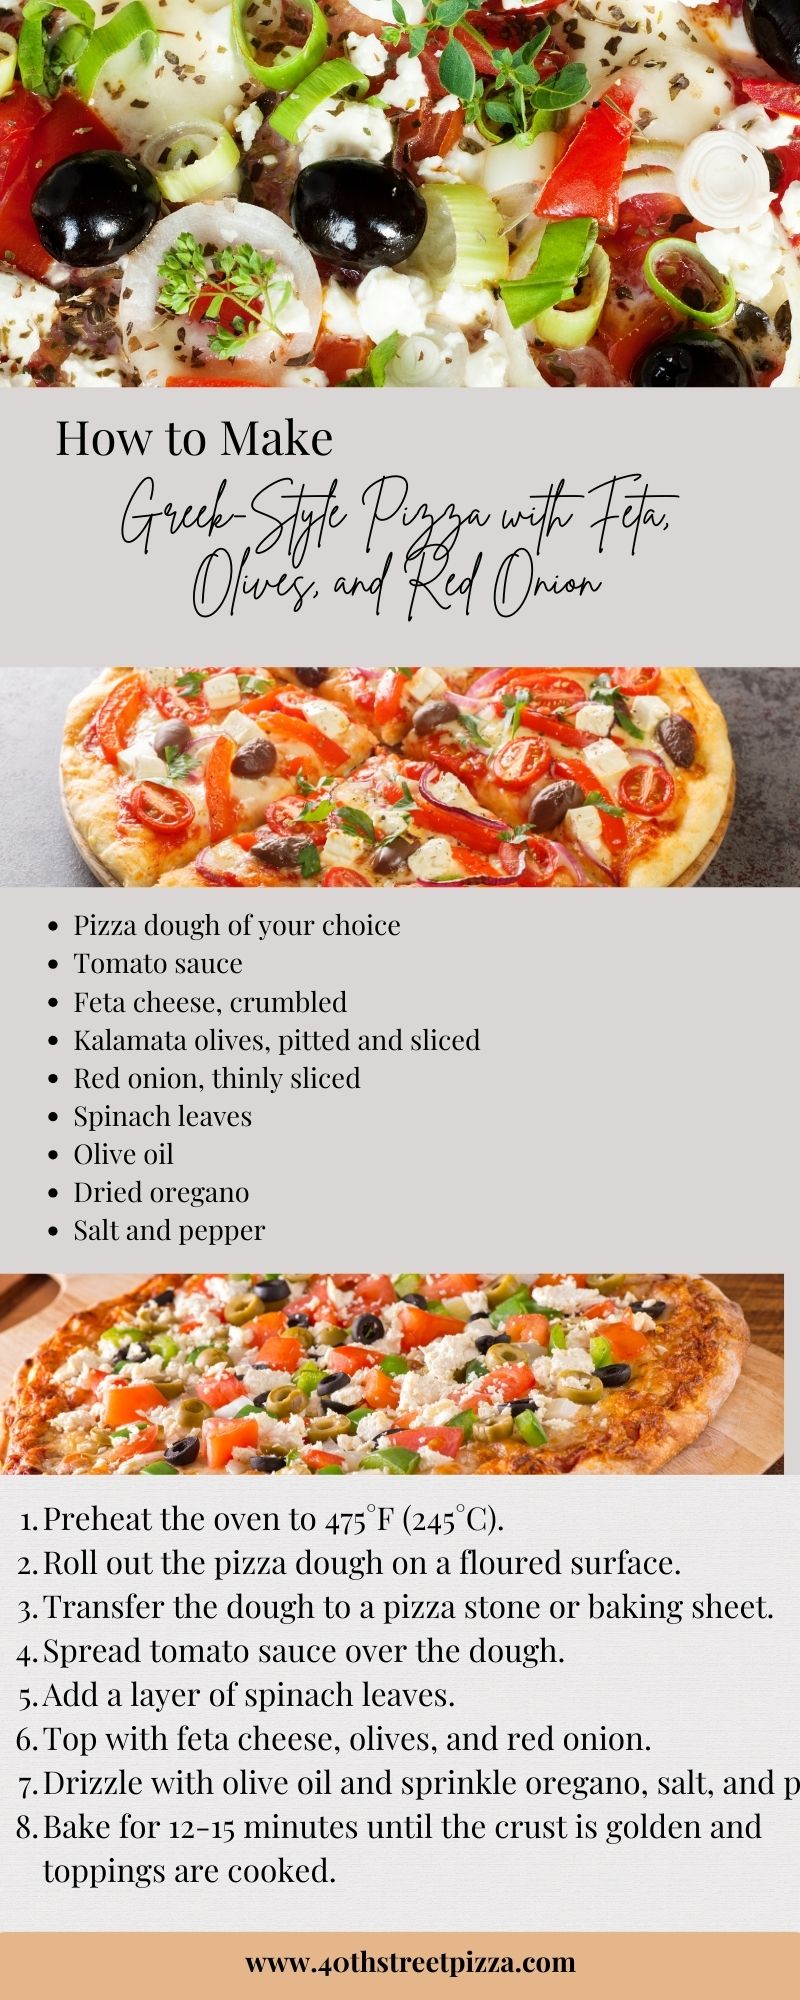 Greek-Style Pizza with Feta, Olives, and Red Onion infographic